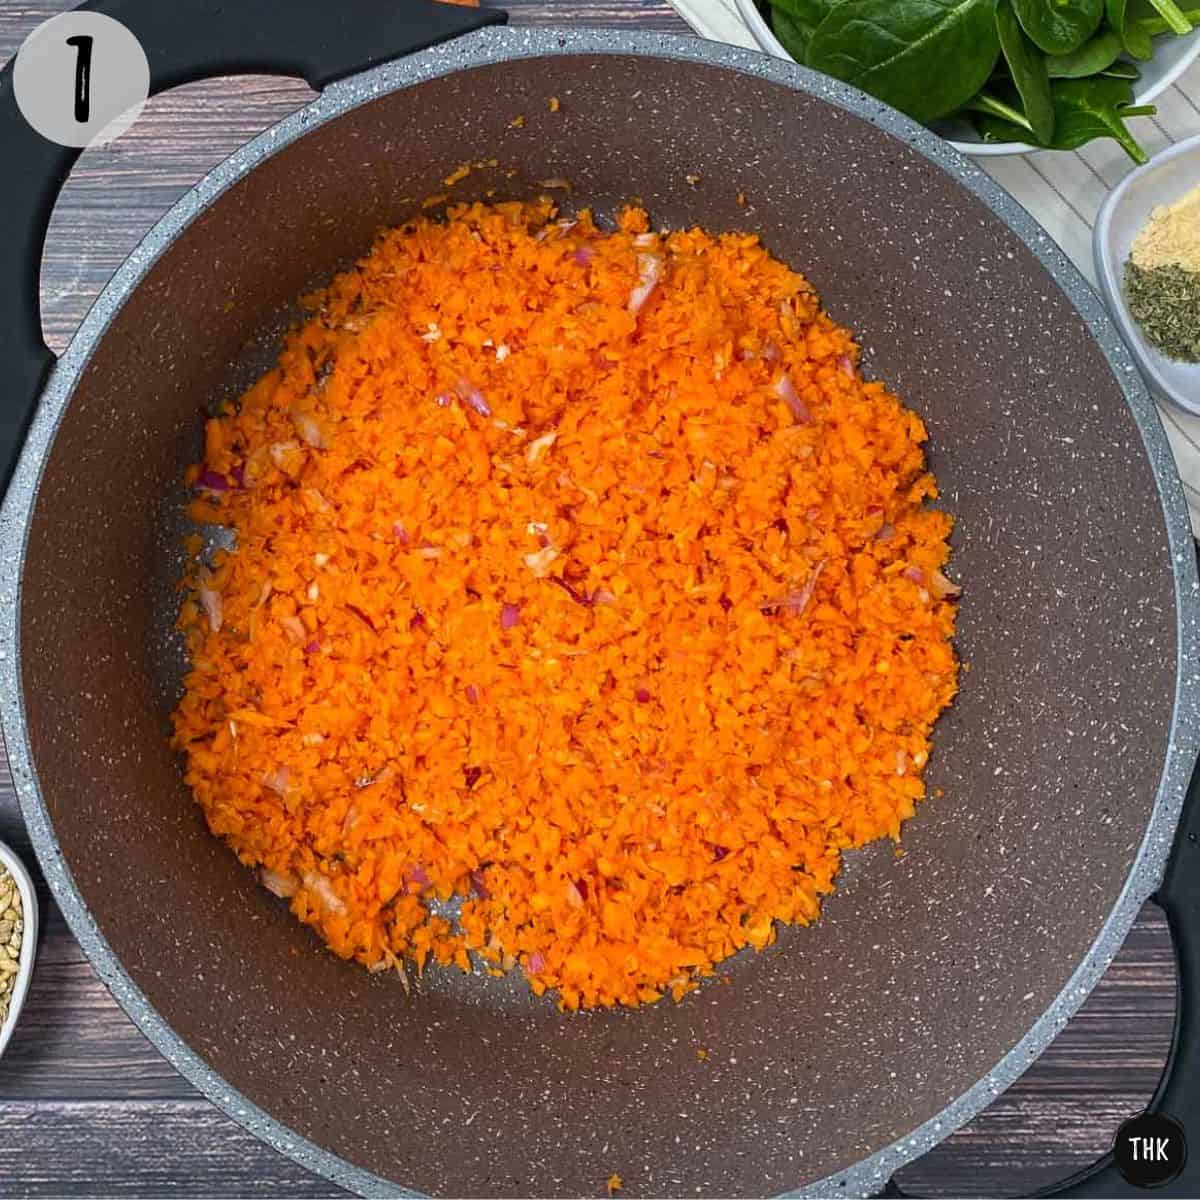 Pot with finely chopped carrots and onion inside.